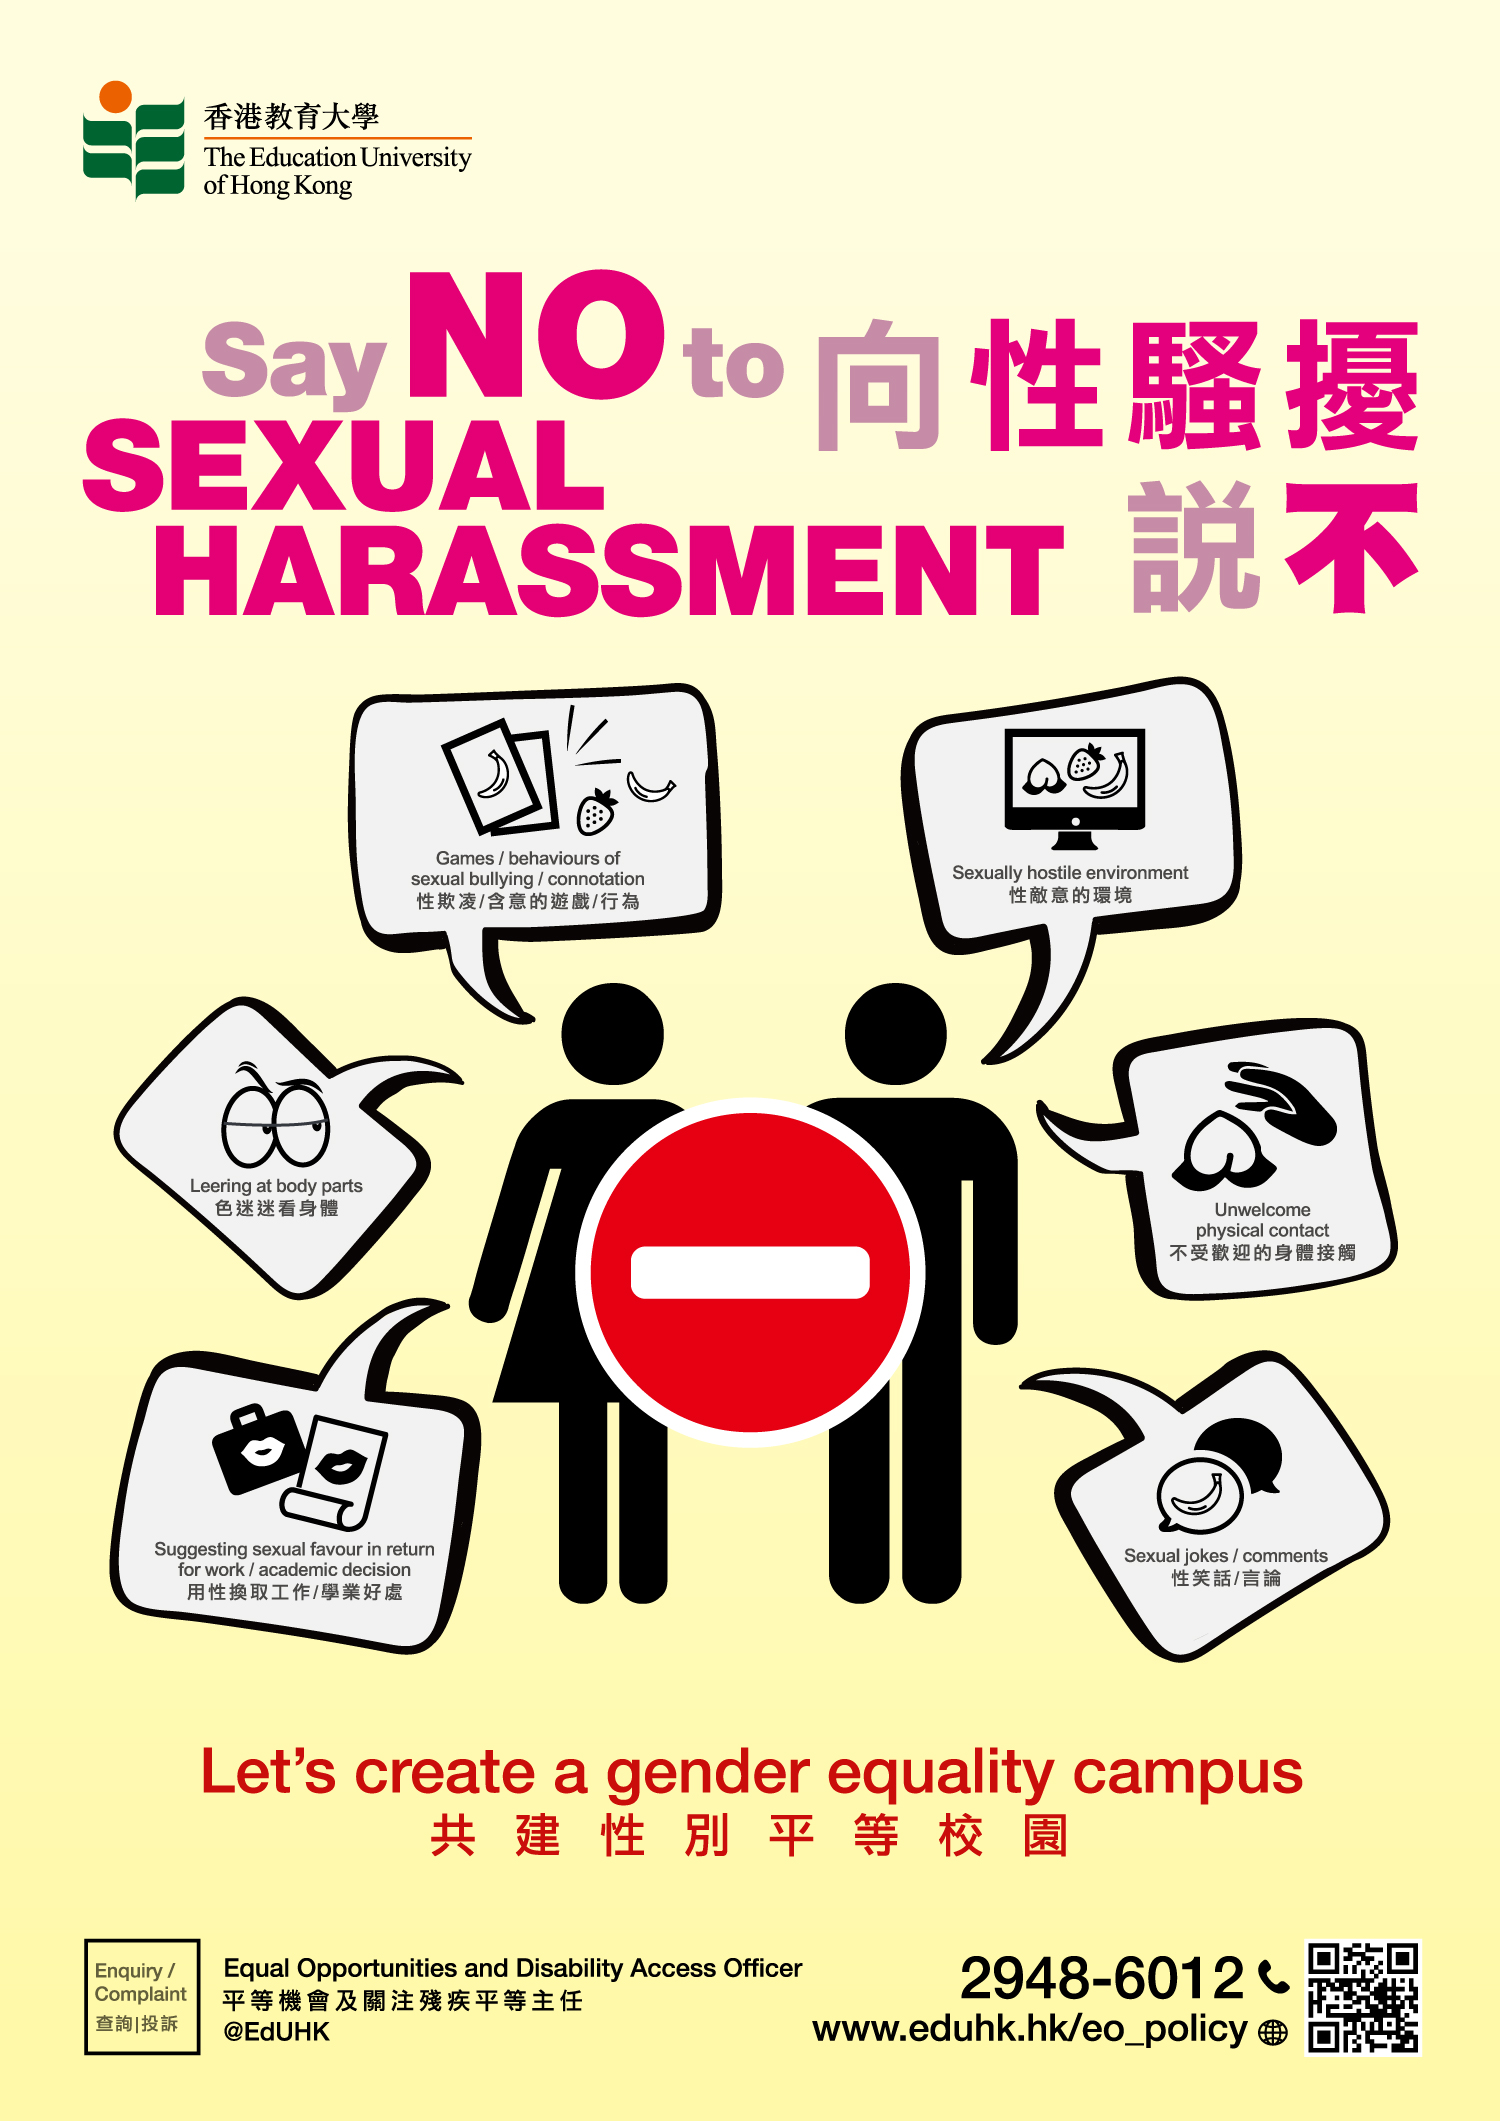 Webpage On Preventing Sexual Harassment Faculty Of Liberal Arts And Social Sciences 